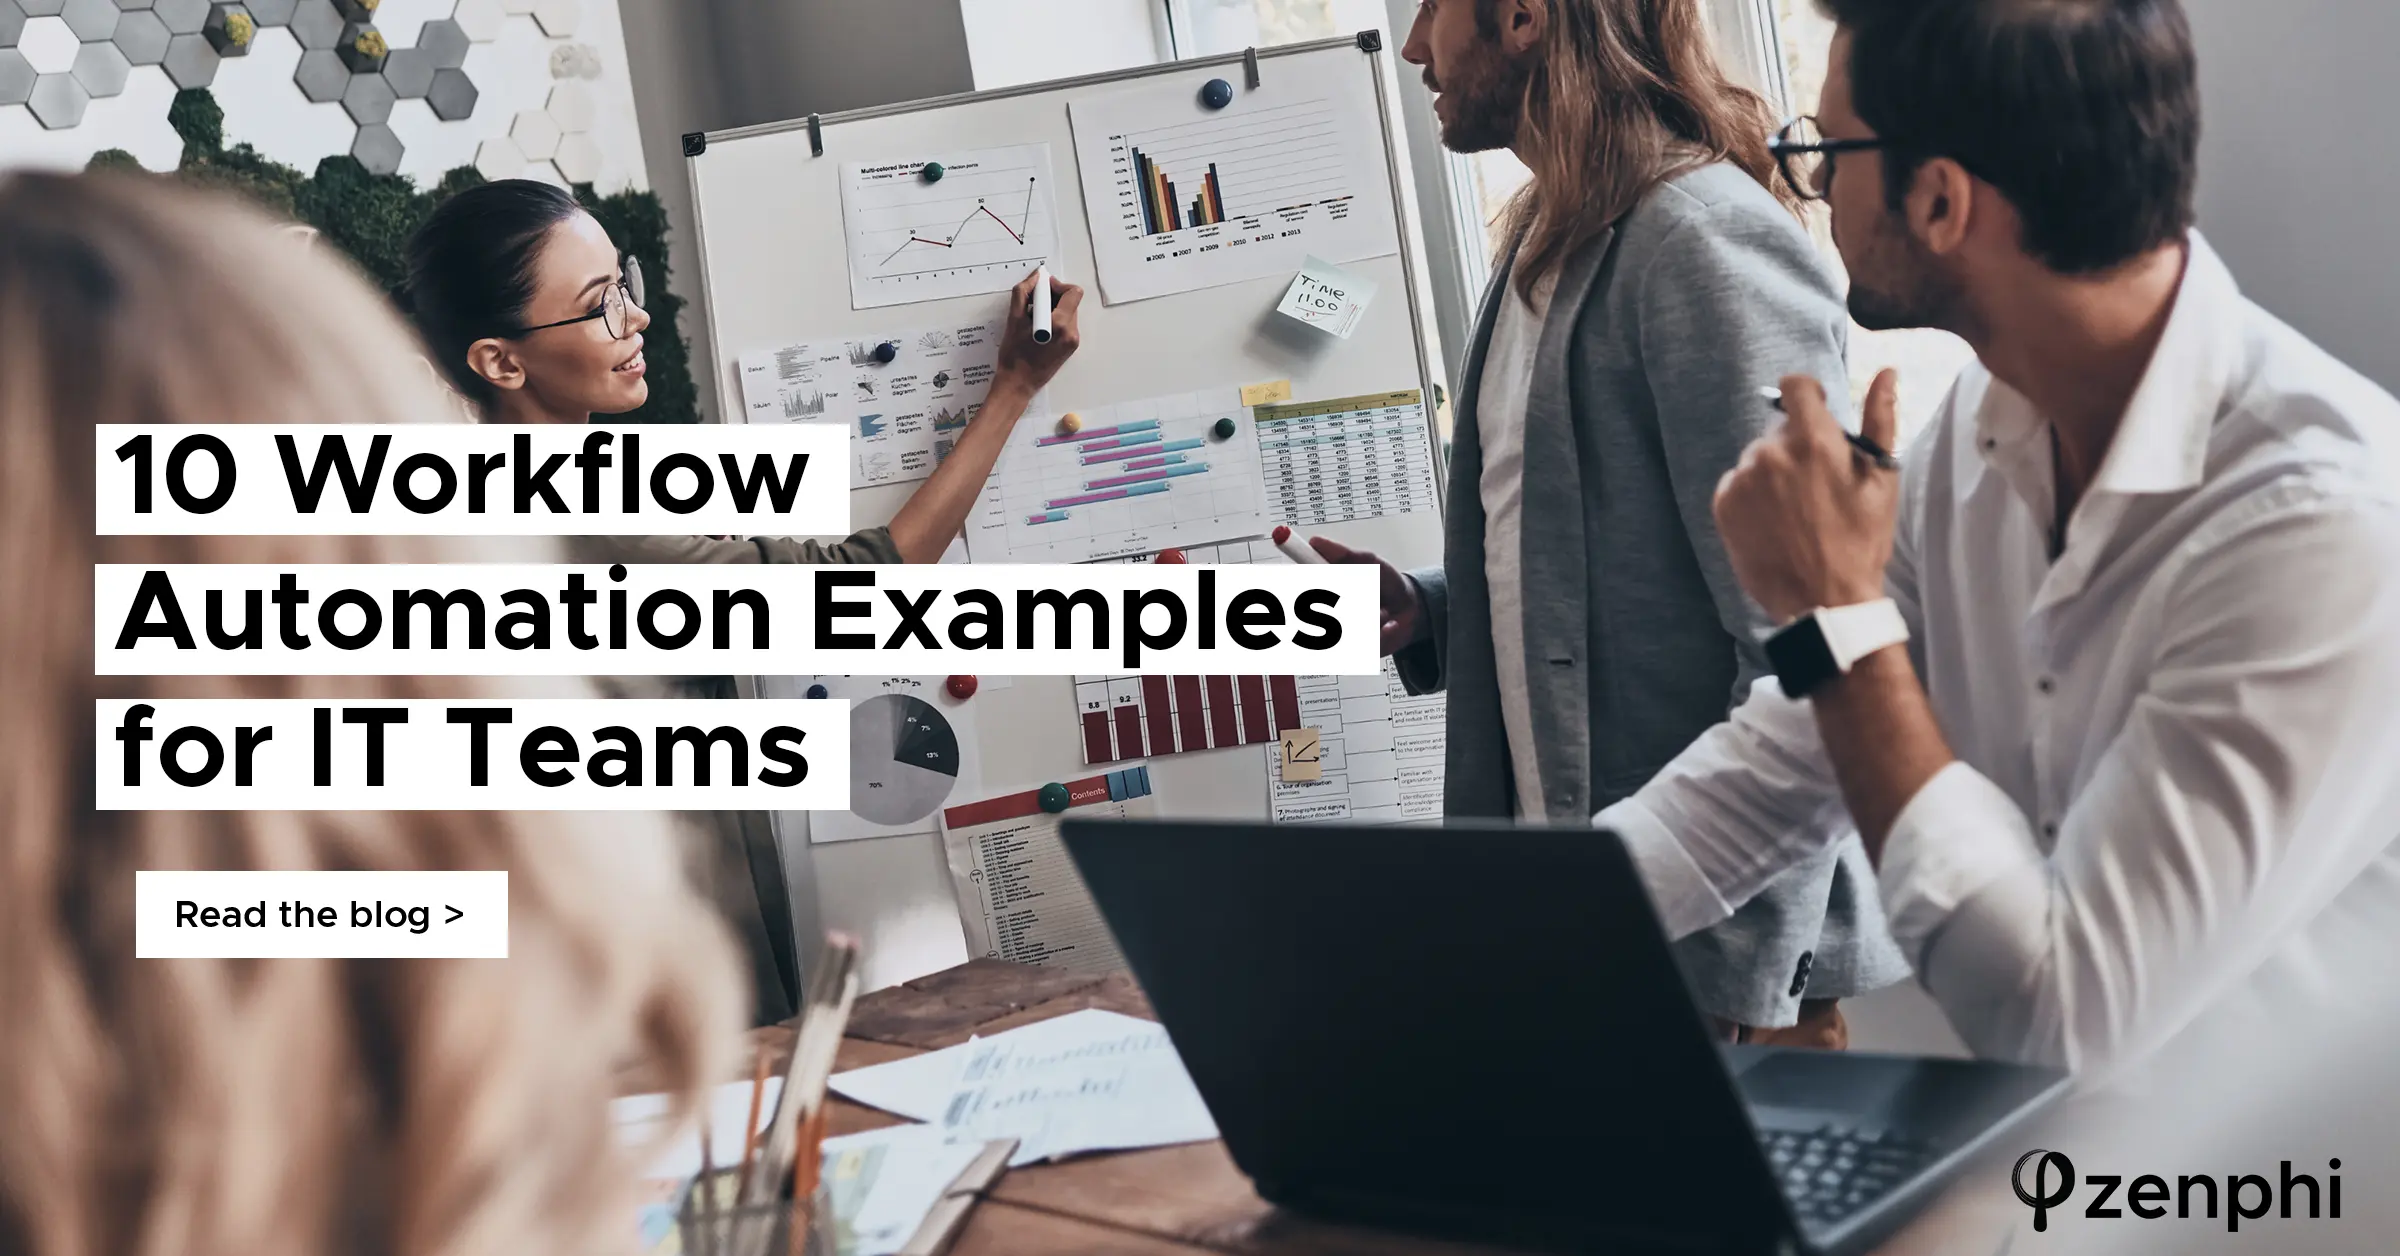 10 Workflow Automation Examples for IT Teams